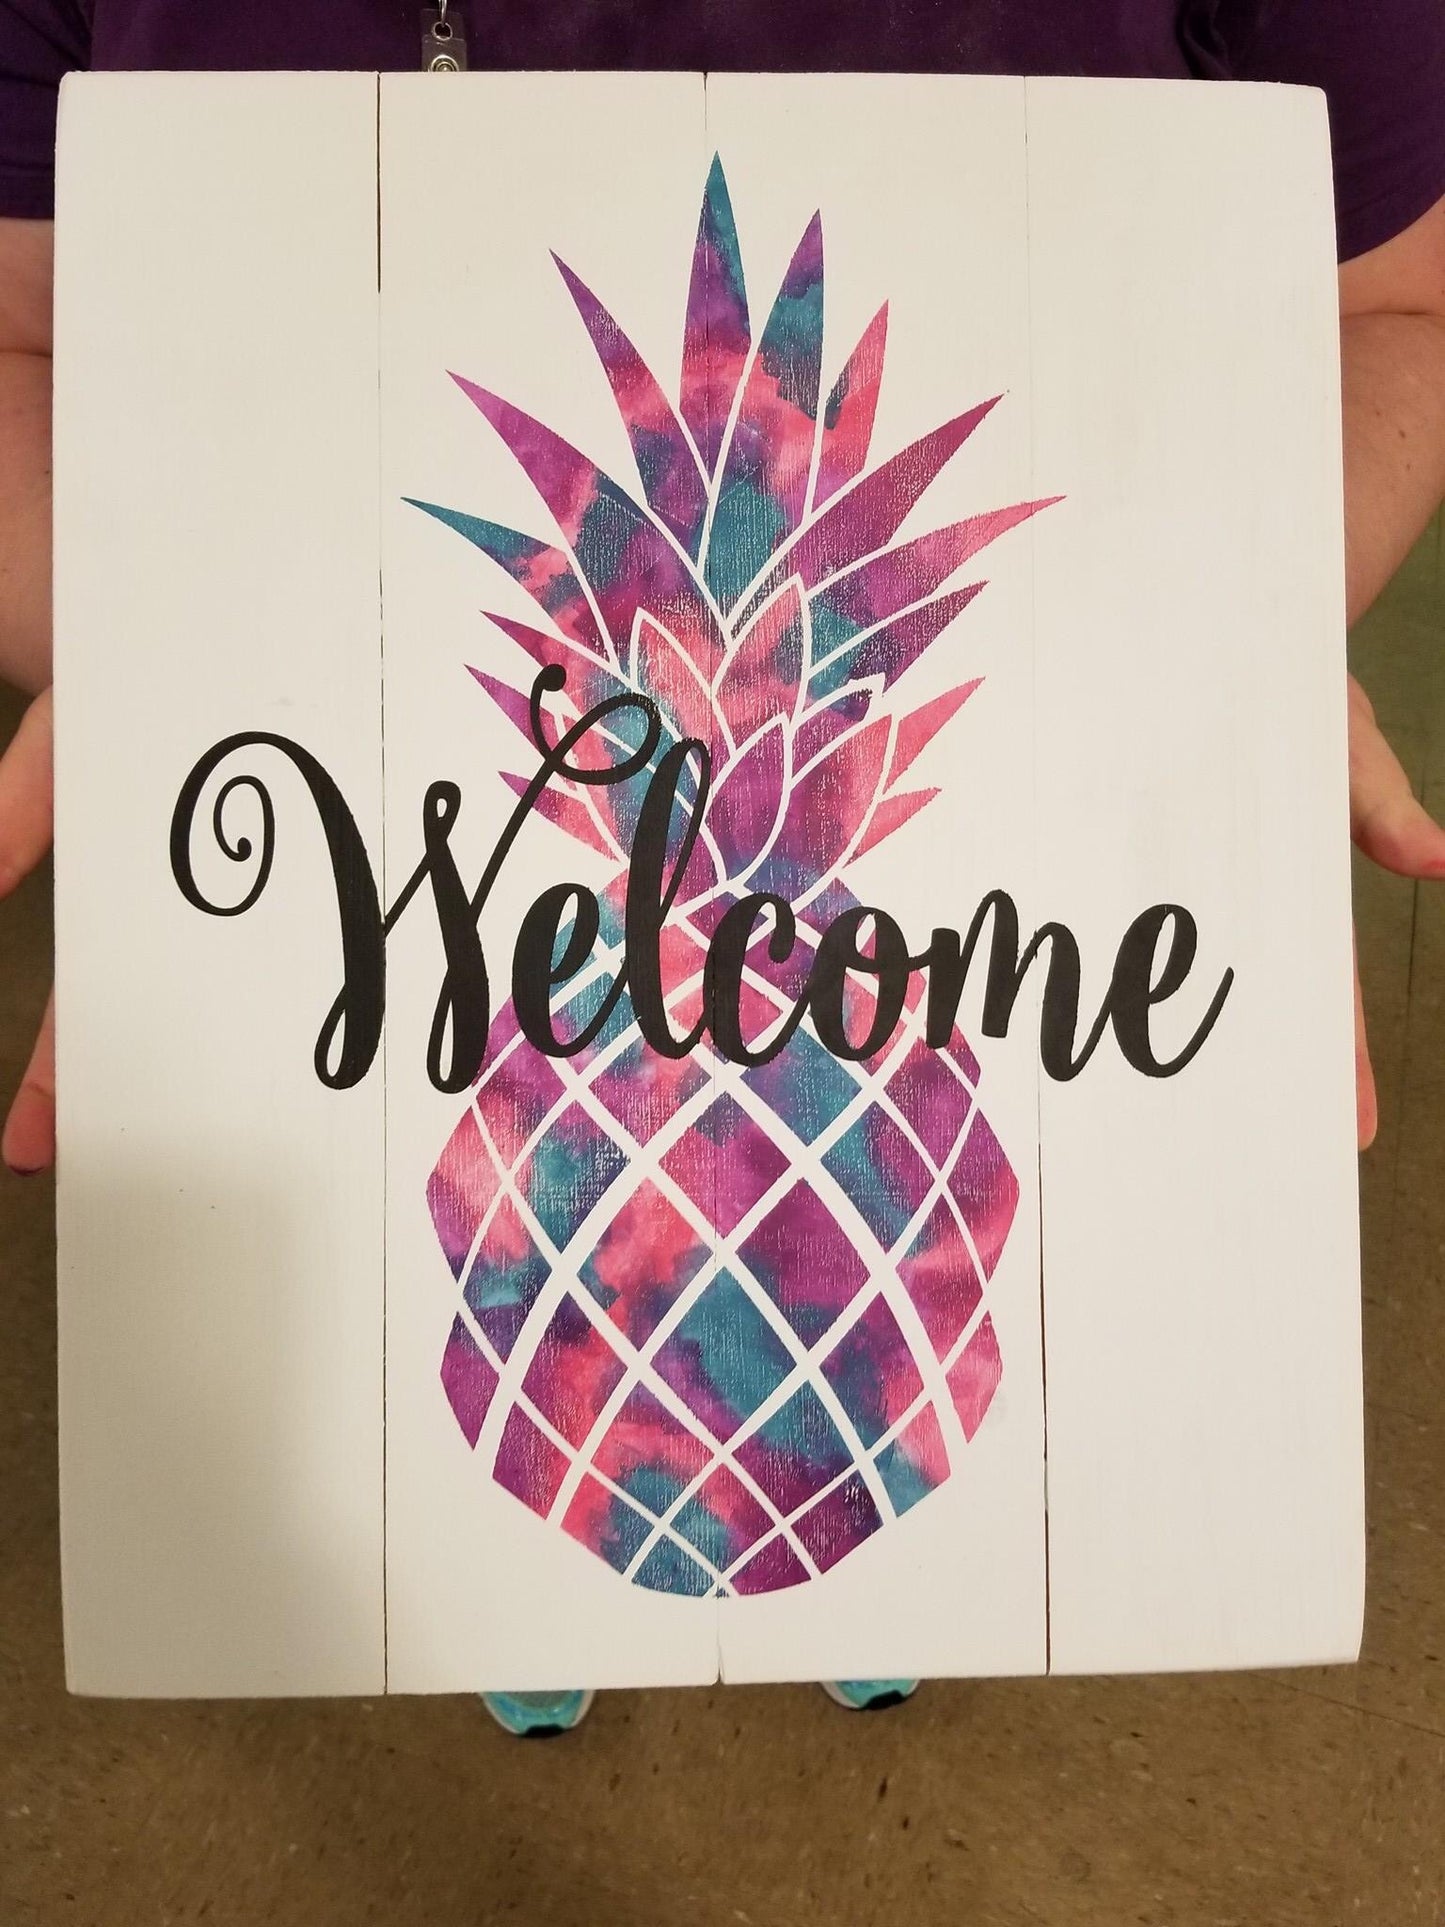 welcome with pineapple